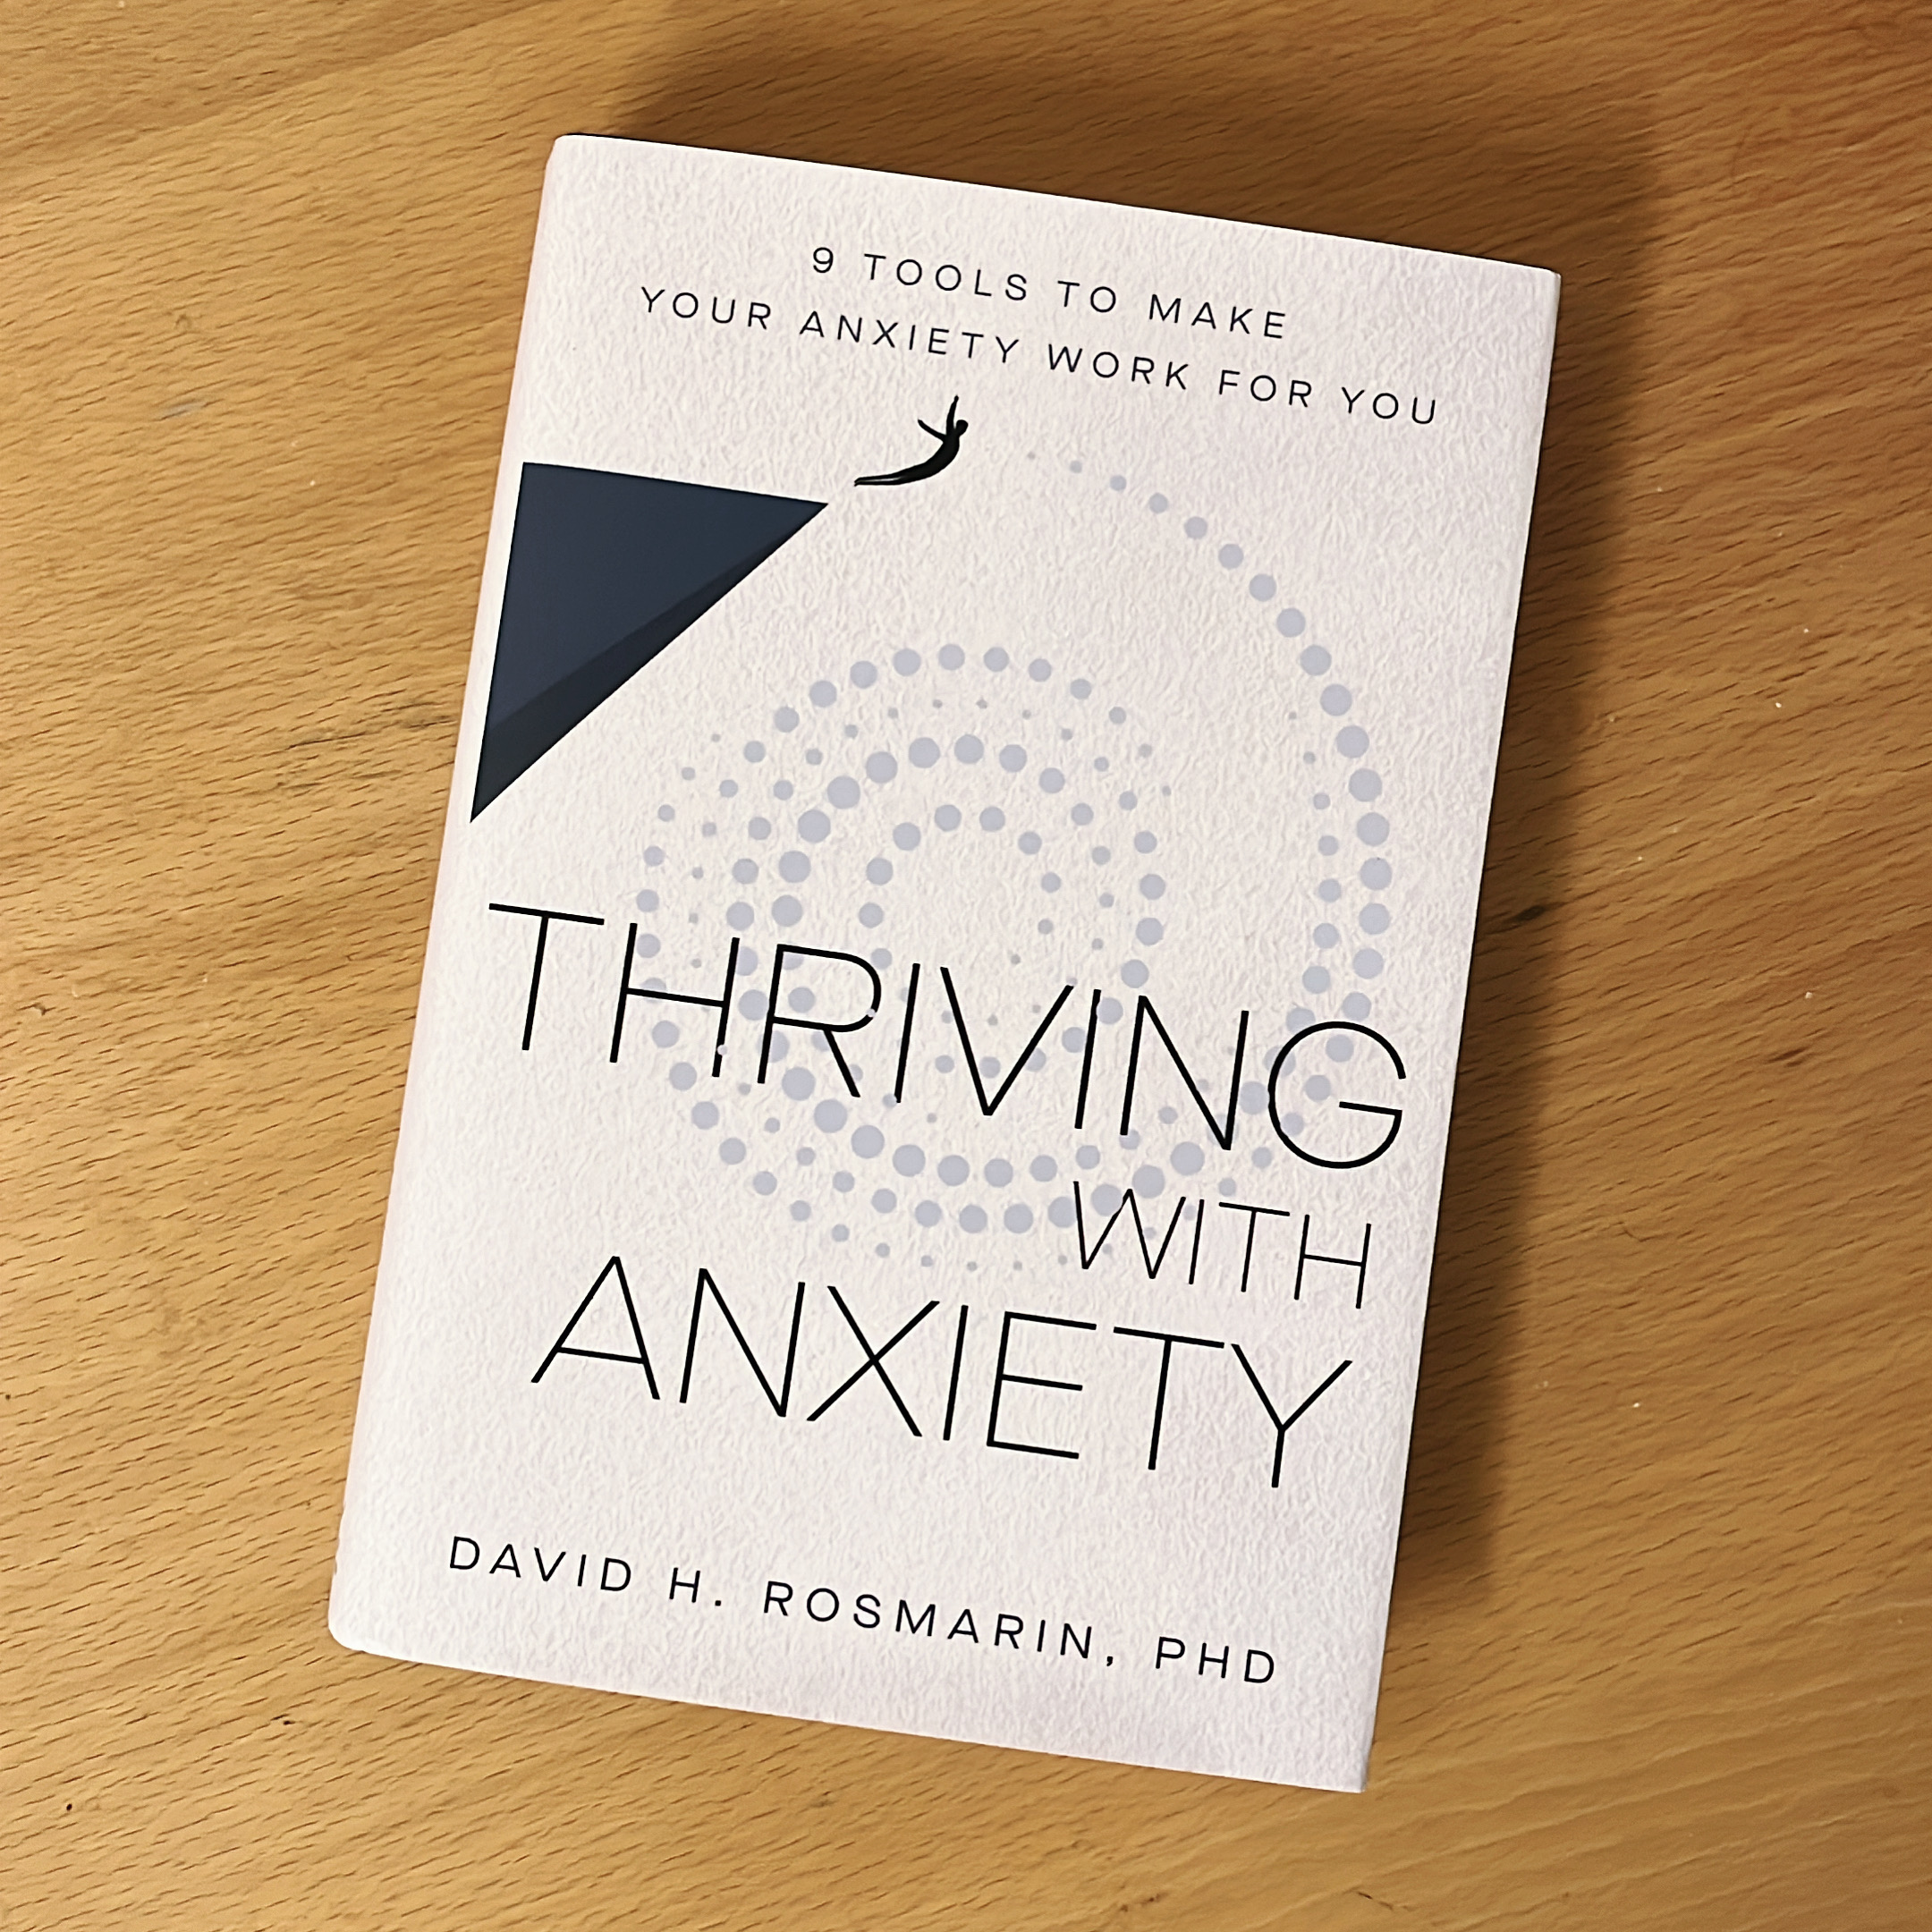 Thriving with Anxiety: 9 Tools to Make Your Anxiety Work for You by David  H. Rosmarin